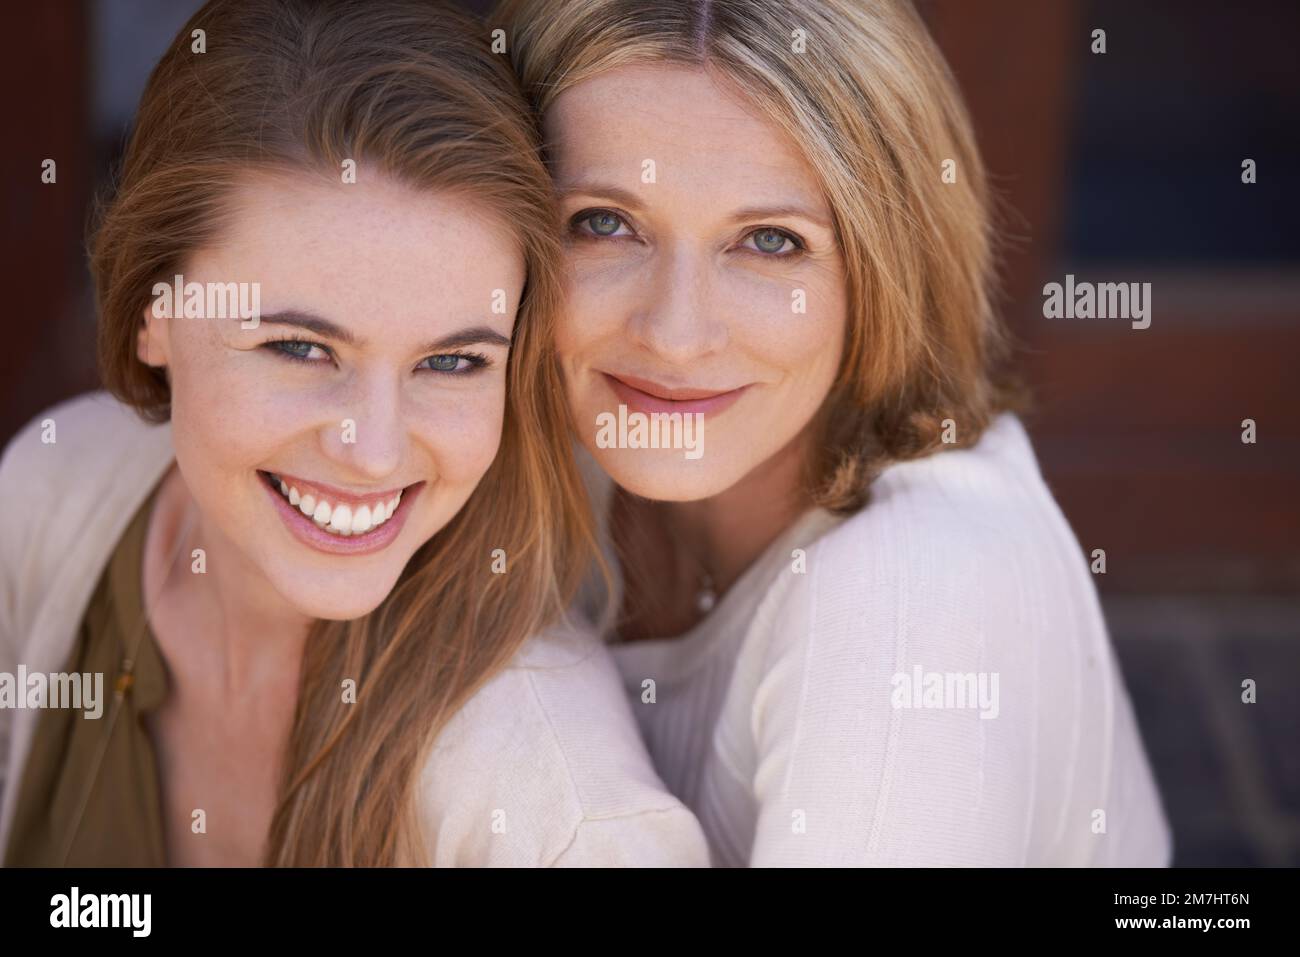 They have a special relationship. Portrait of a loving mother and daughter standing close together. Stock Photo